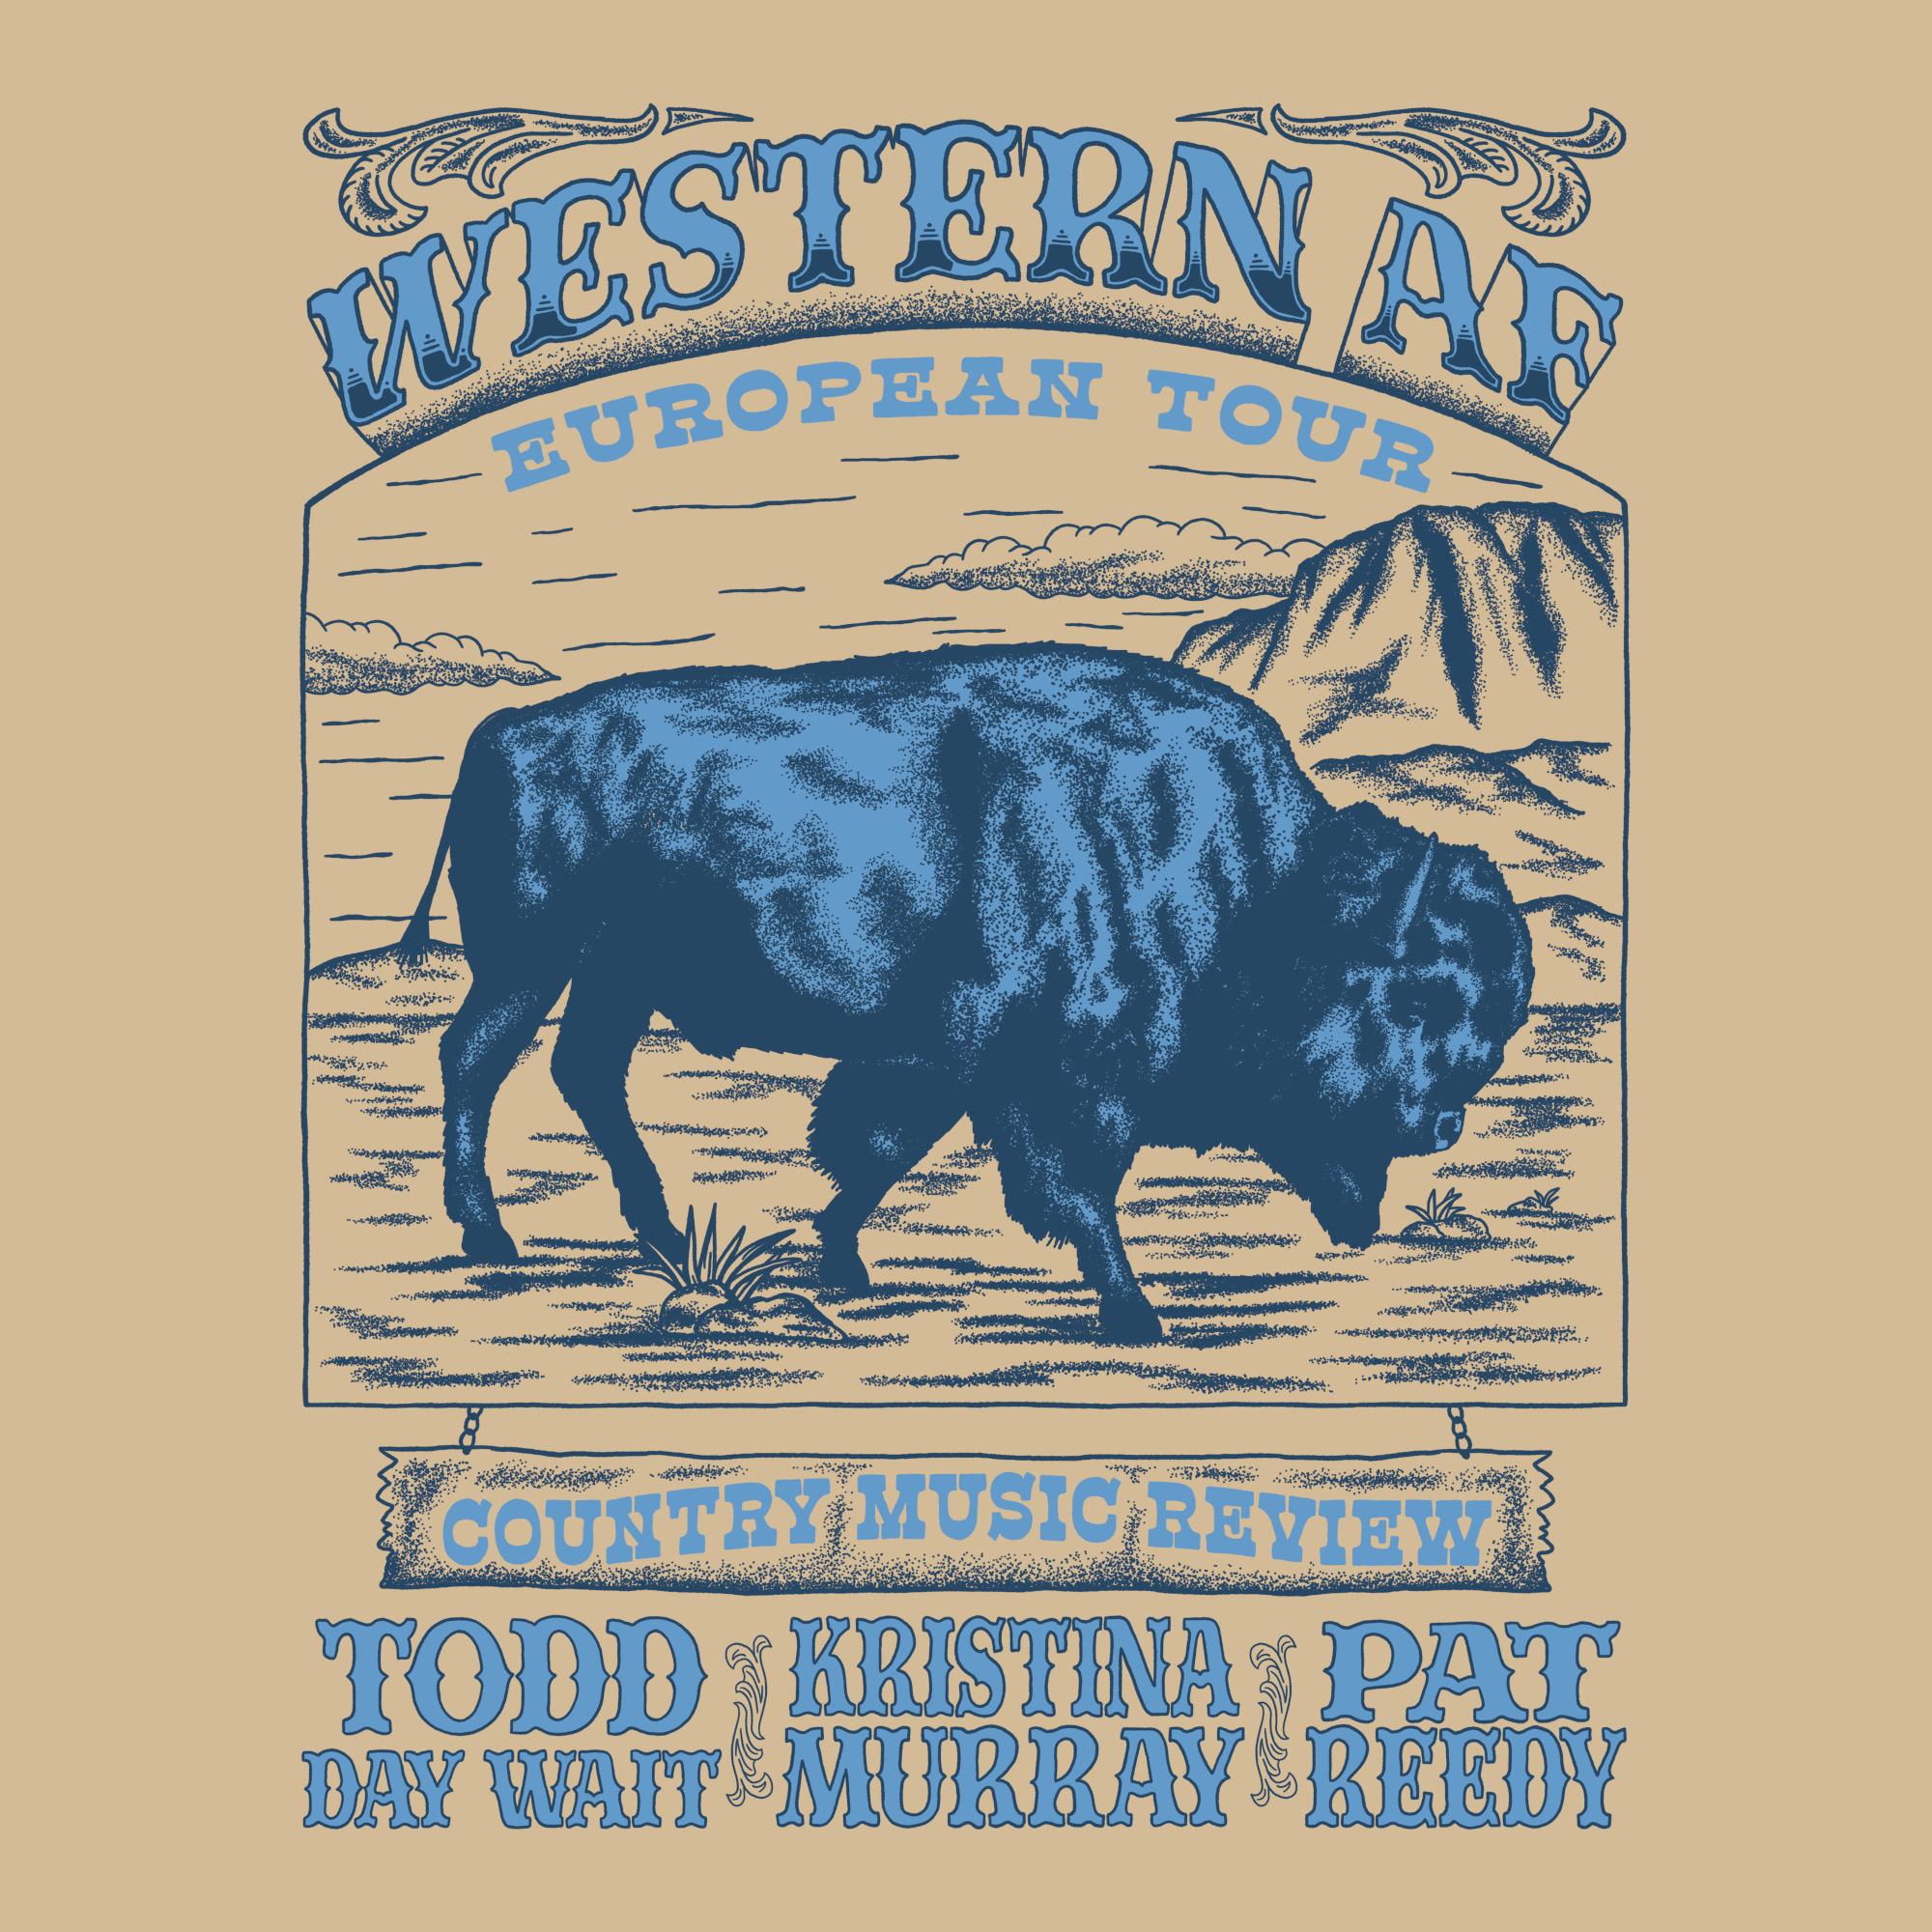 Western AF European Tour "Country Music Review" feat. Kristina Murray, Todd Day Wait & Pat Reedy